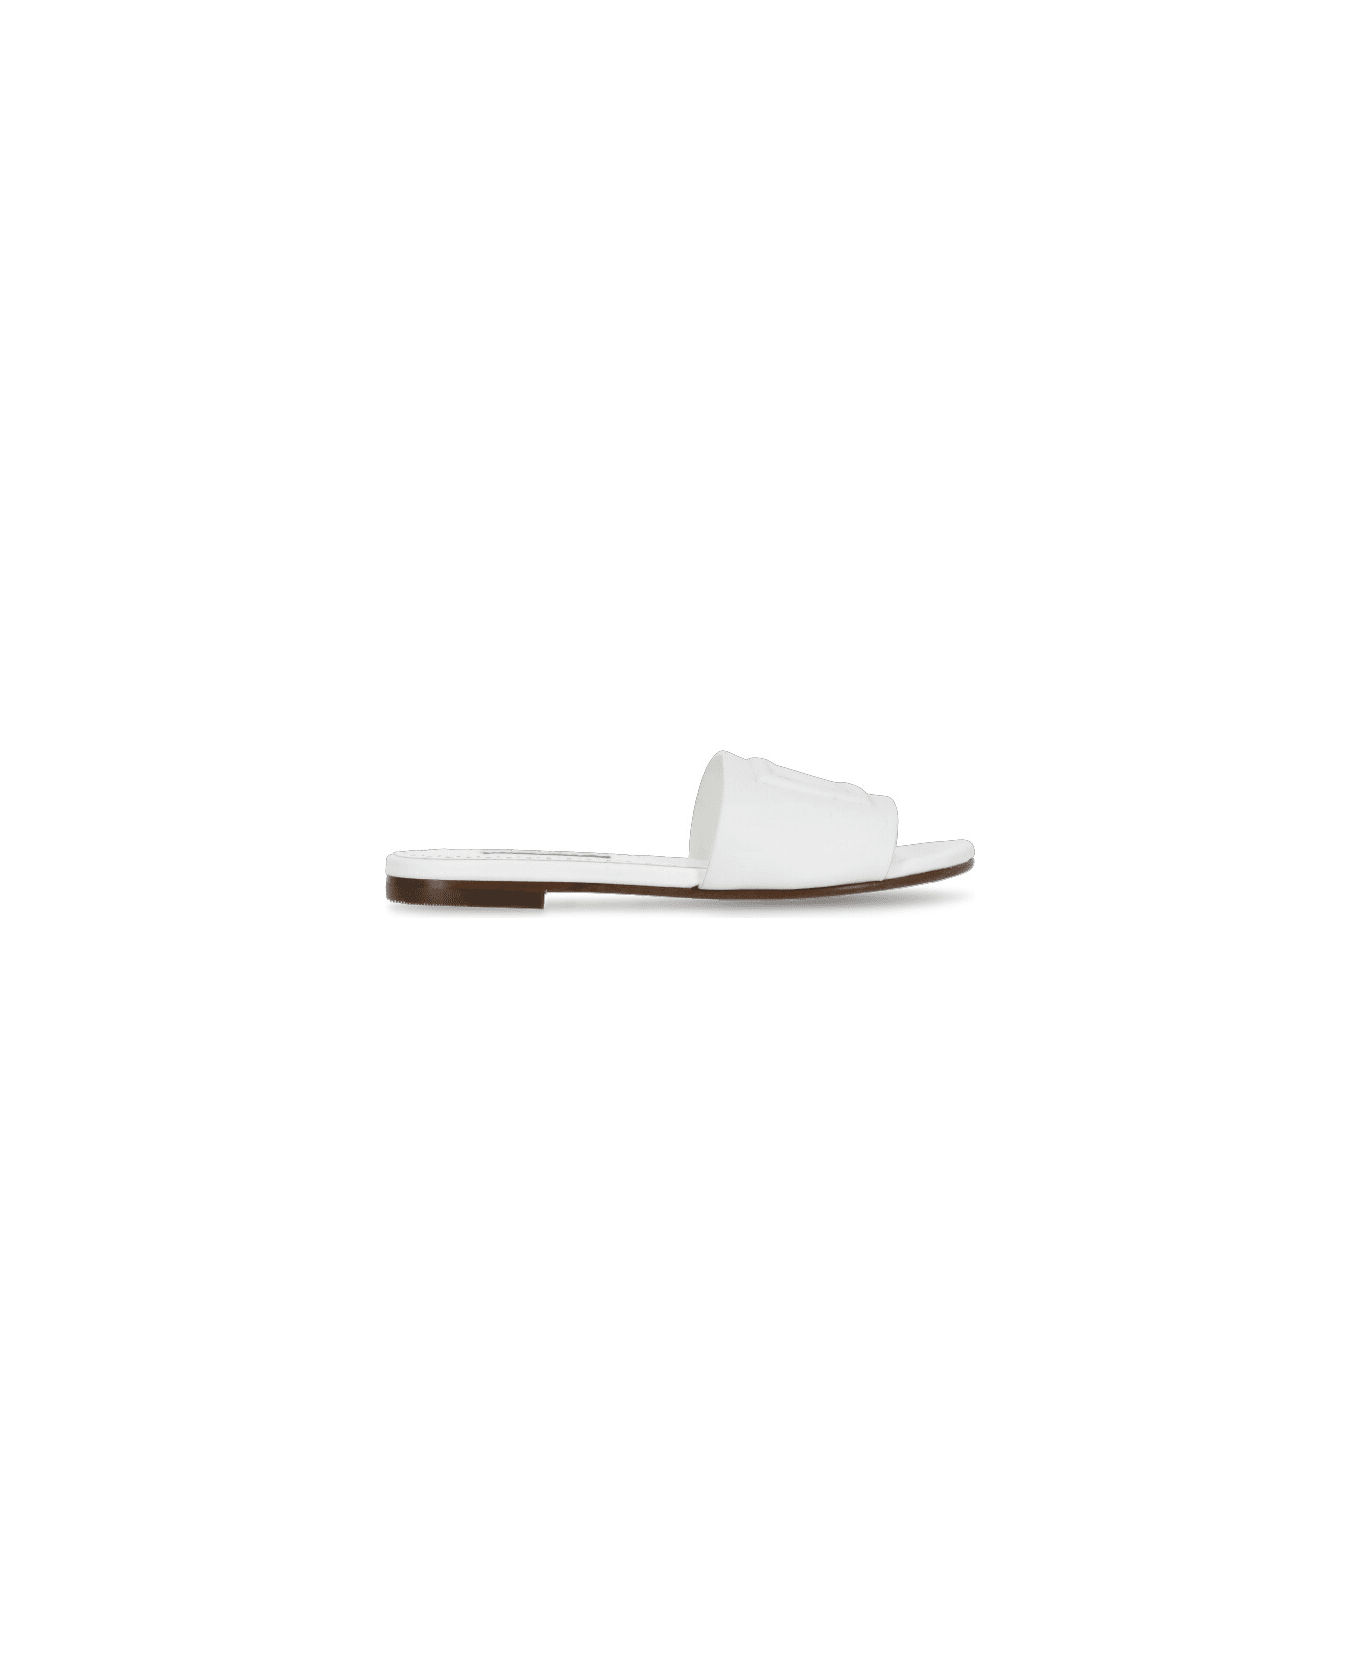 Dolce & Gabbana Leather Slippers - White